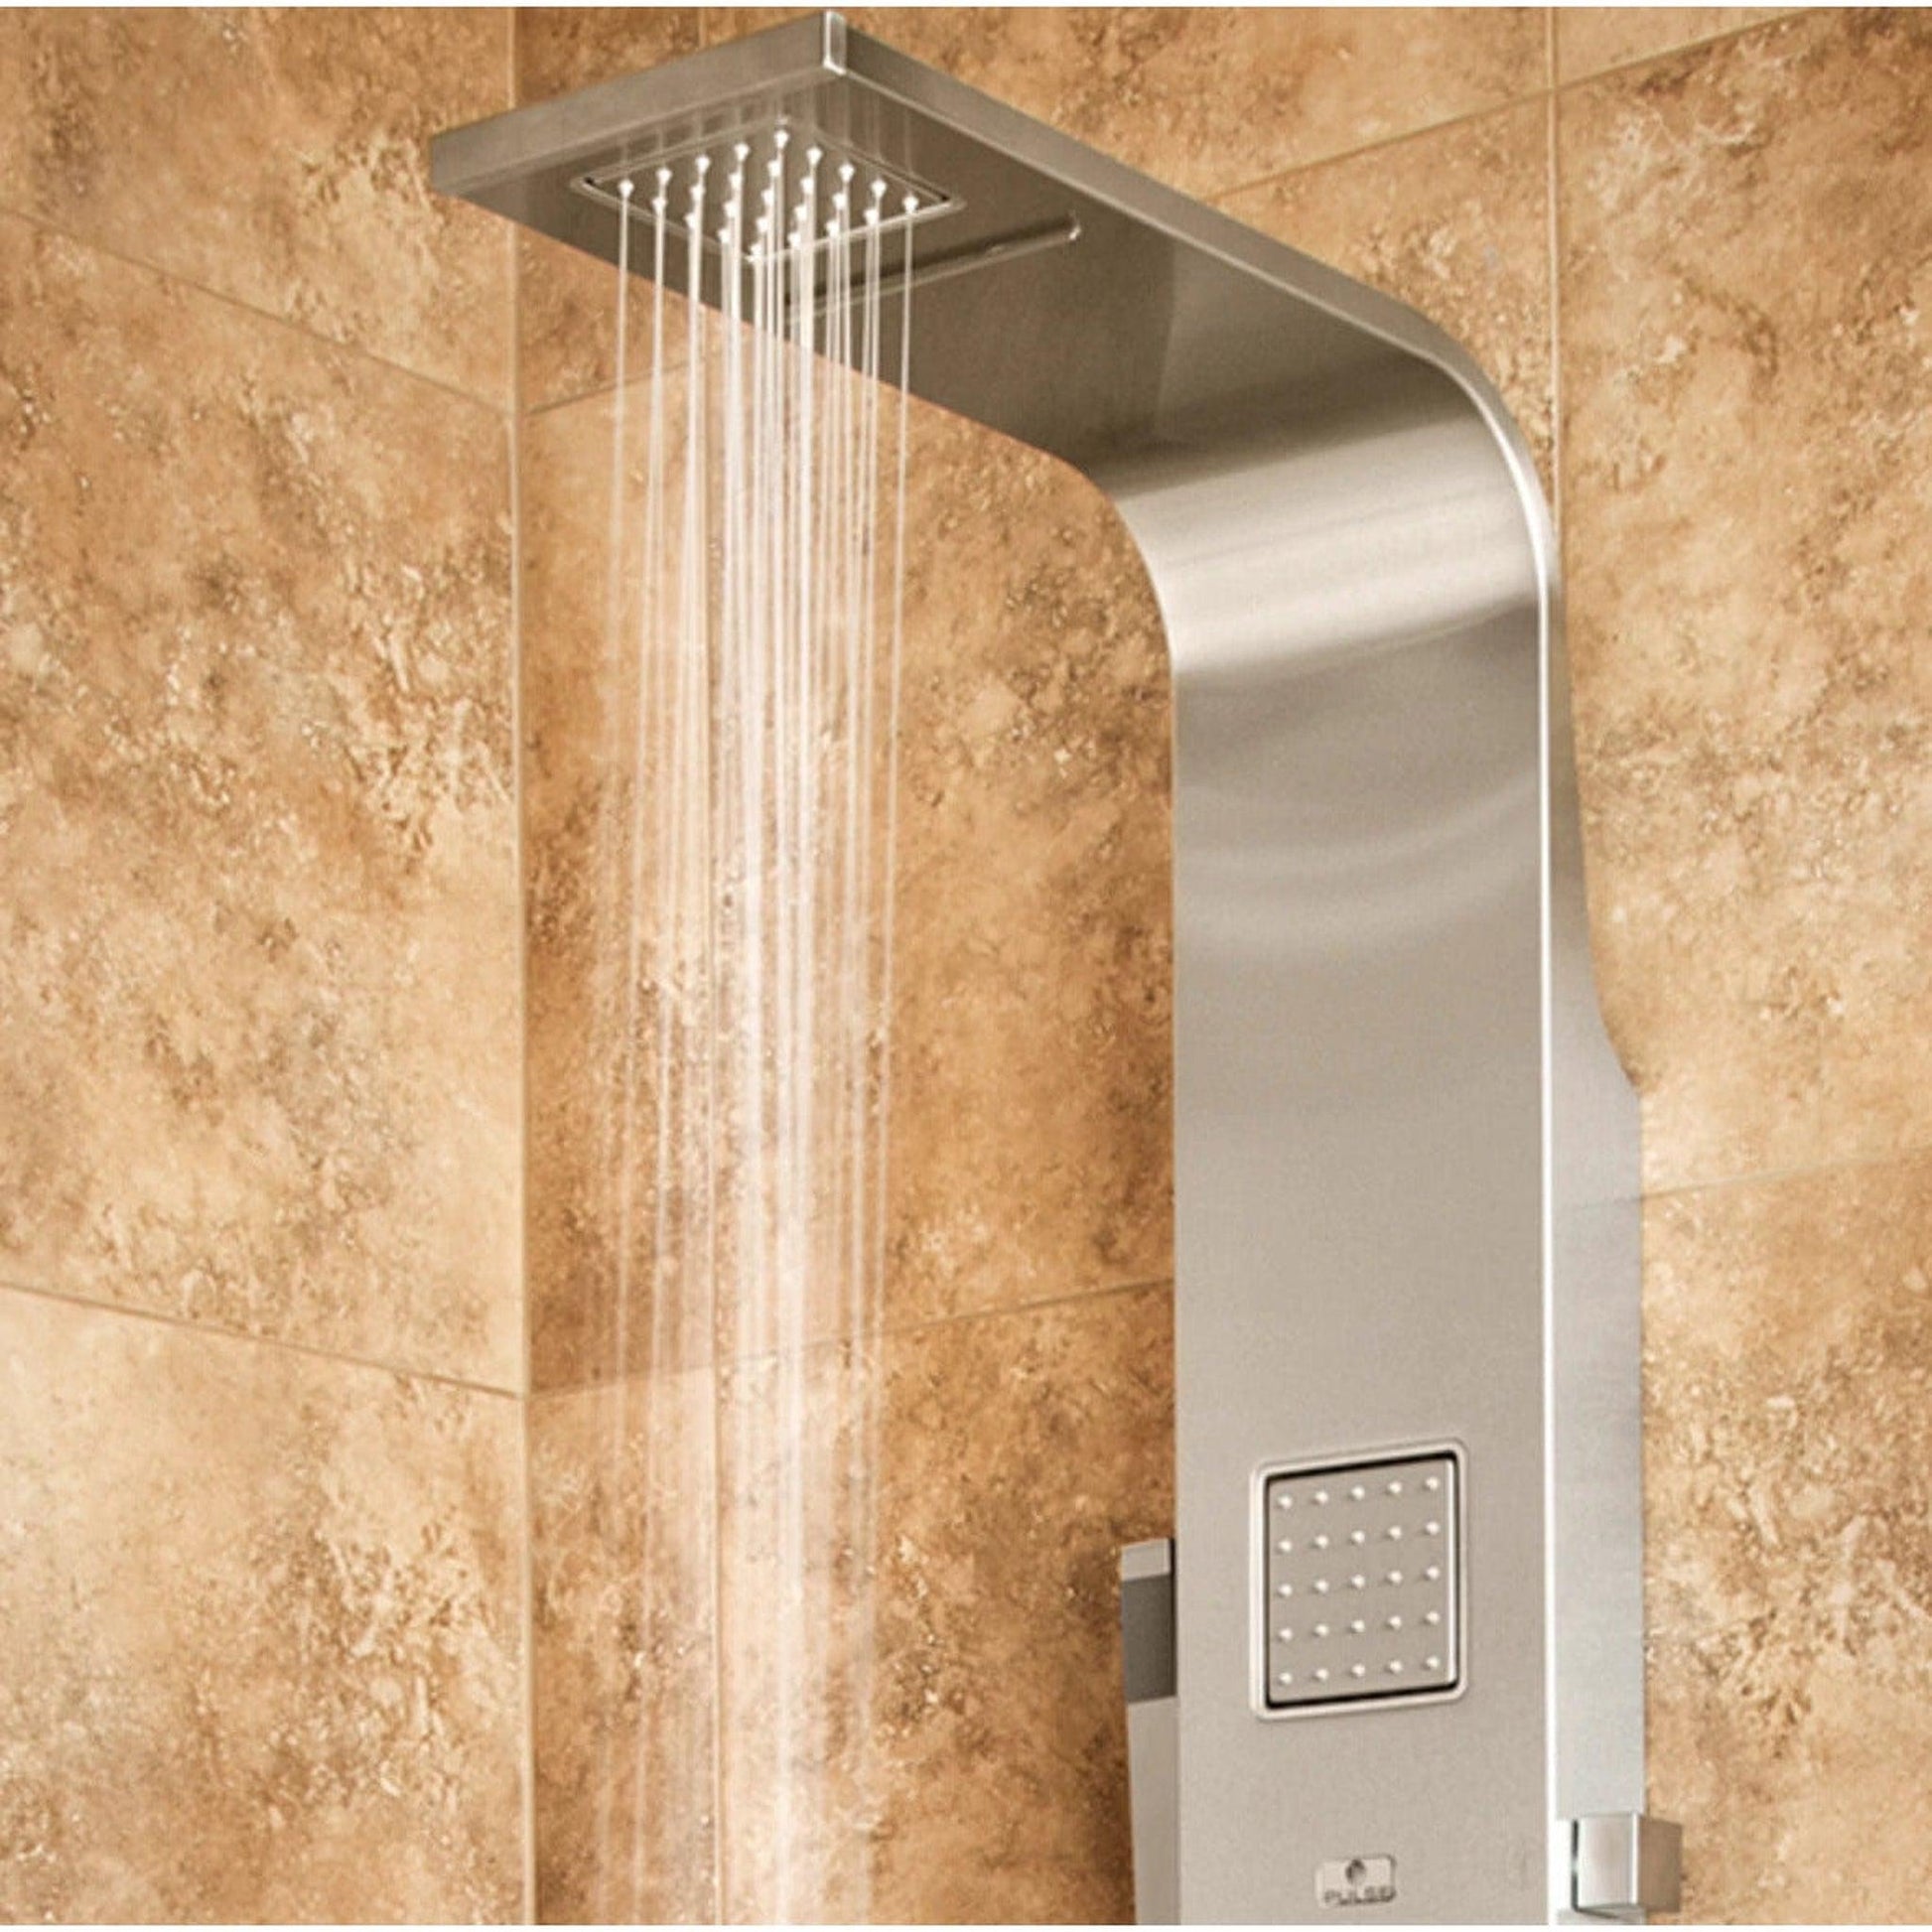 PULSE ShowerSpas Waimea 62" Rain And Waterfall Shower Panel 2.5 GPM in Matte Brushed Stainless Steel Finish With 3 Extra Large Body Jets and Single Function Hand Shower